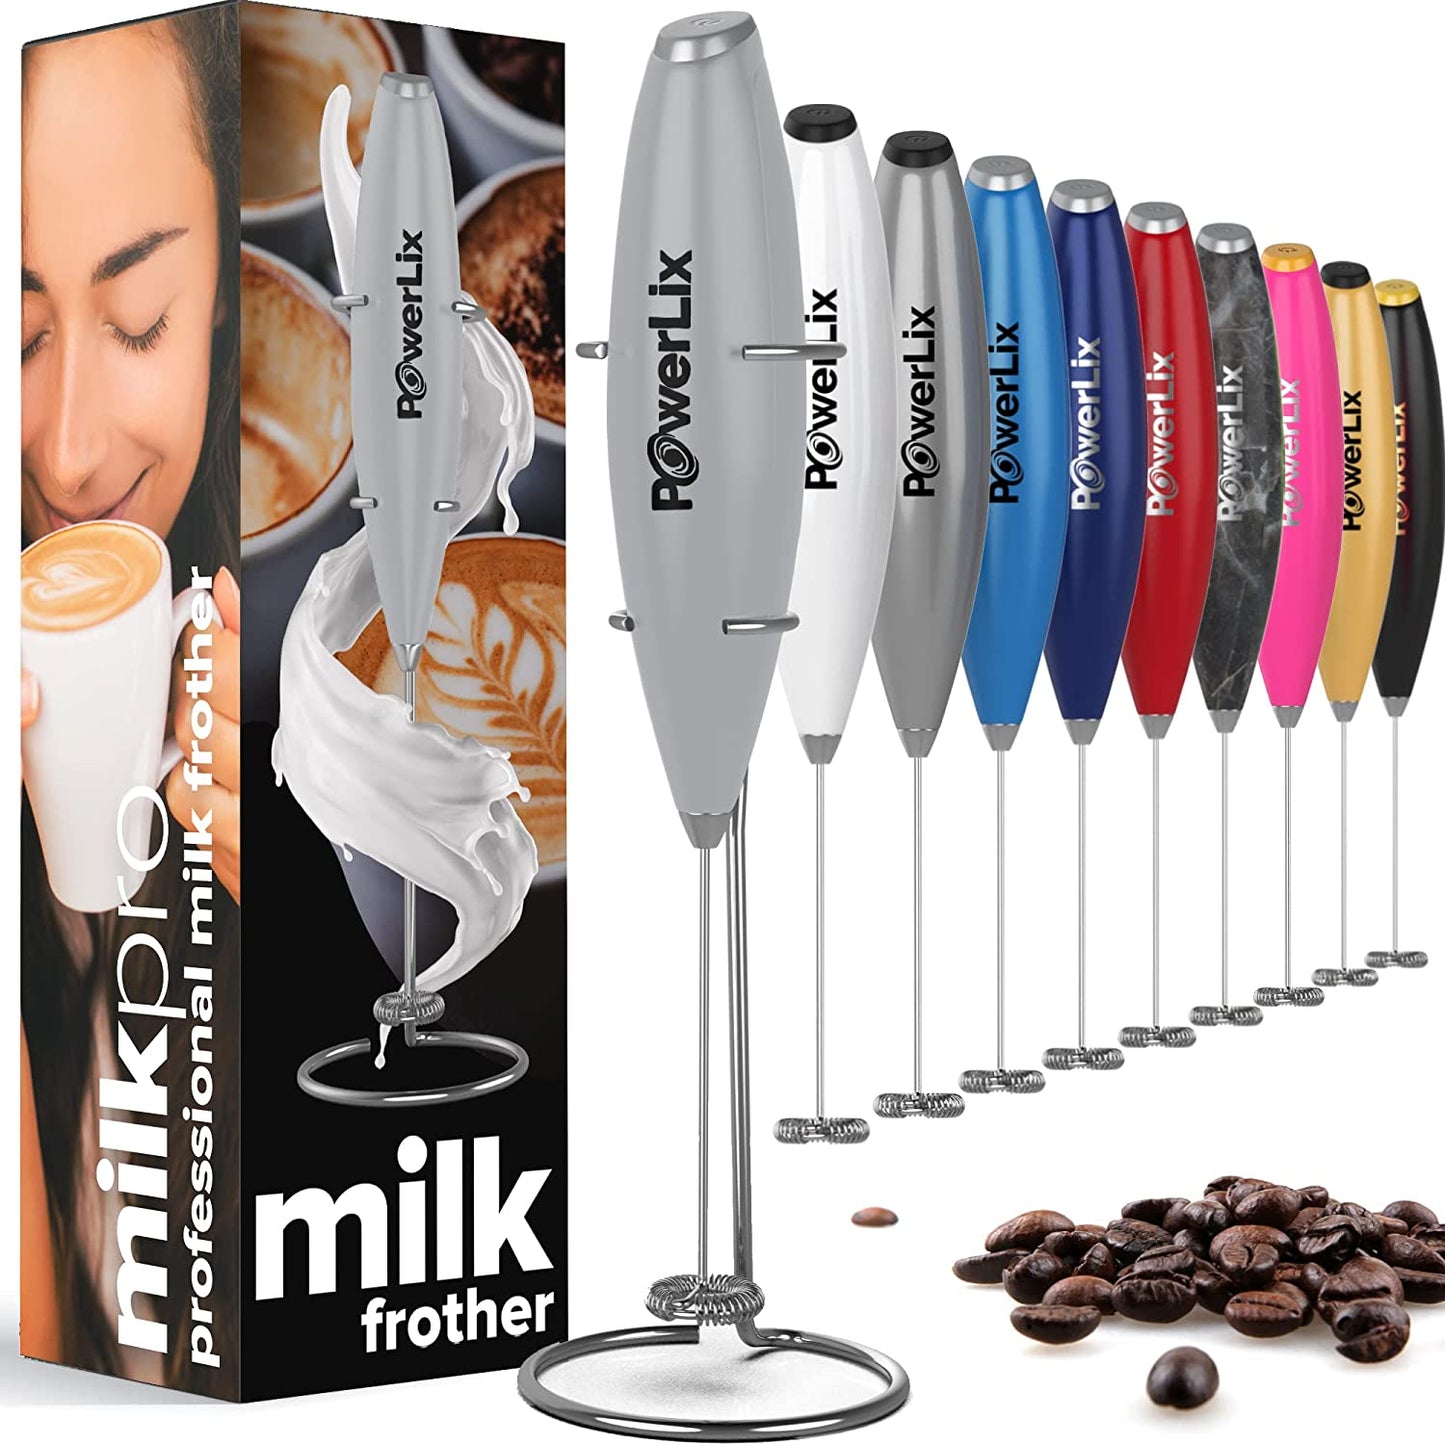 Powerlix milk frother in gray with black text. Other colors and their boxes are displayed.